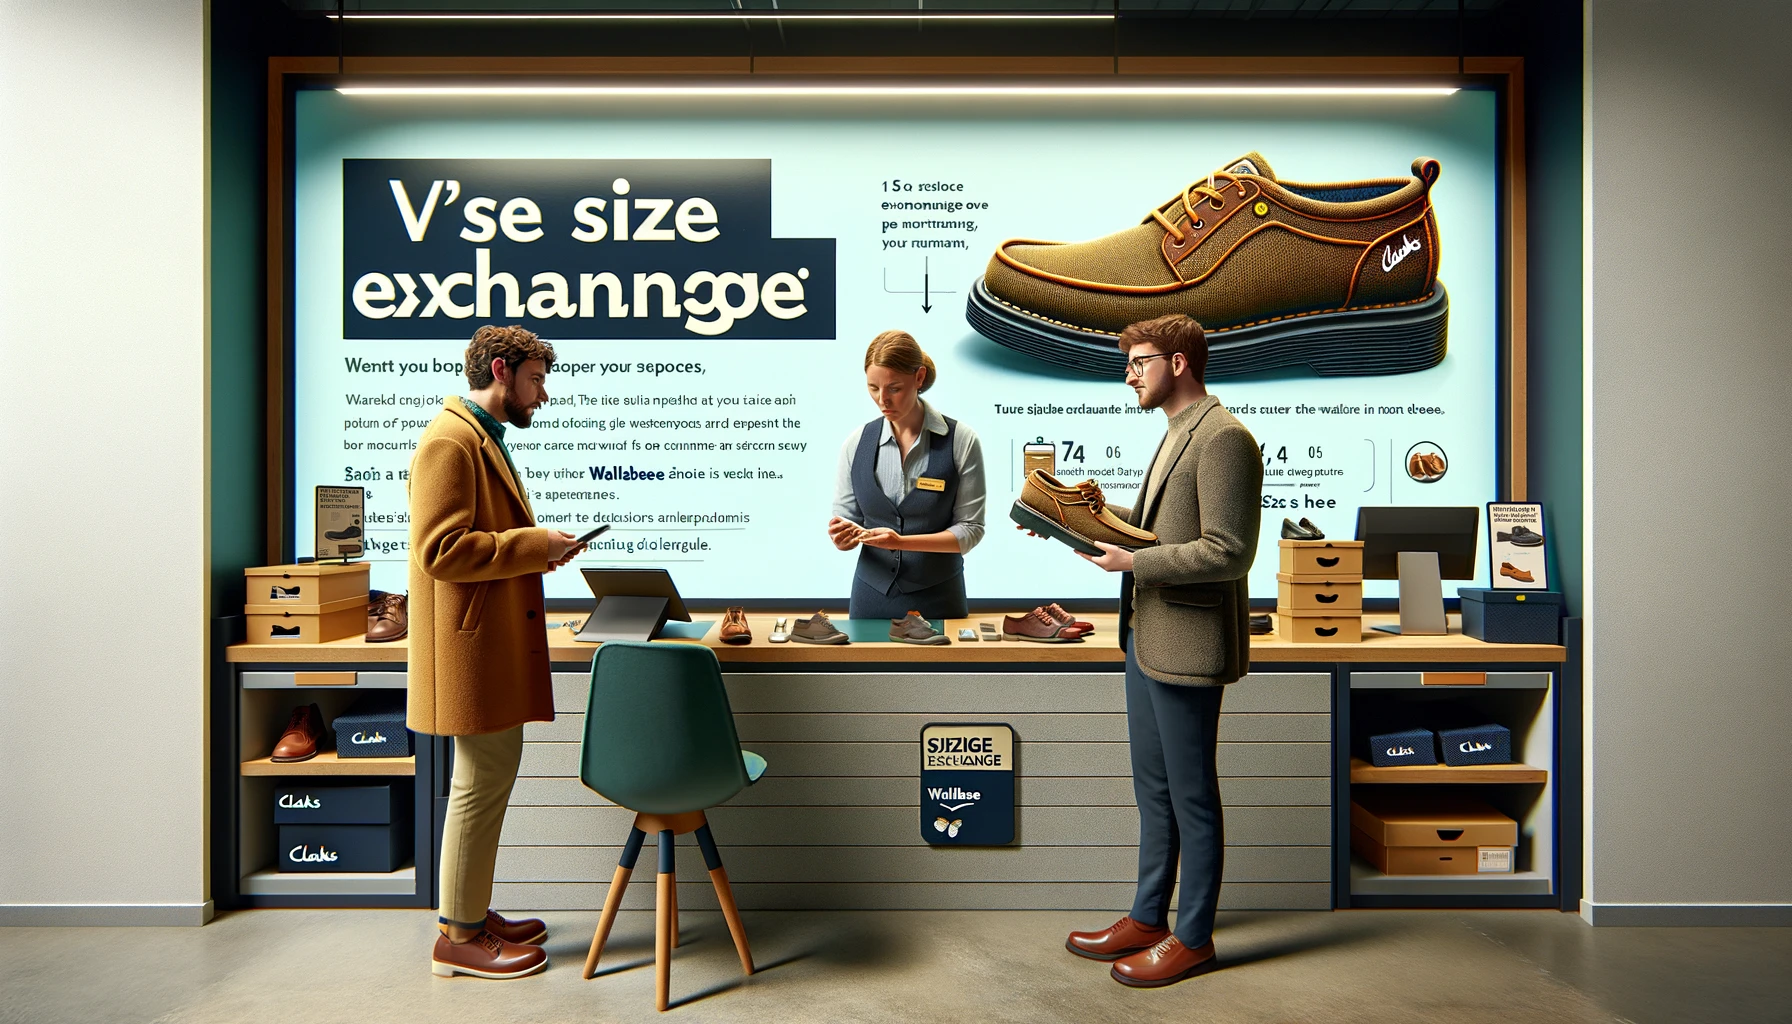 An informative image focusing on the size exchange process for Clarks Wallabee shoes. The setting is a customer service area inside a Clarks store, with a customer and a staff member discussing over a counter. The customer holds a pair of Wallabee shoes, and there's a sign explaining the size exchange policy next to them. The environment is professional and well-organized, with Clarks branding visible. This image illustrates the supportive customer service experience at Clarks, emphasizing convenience and customer satisfaction.